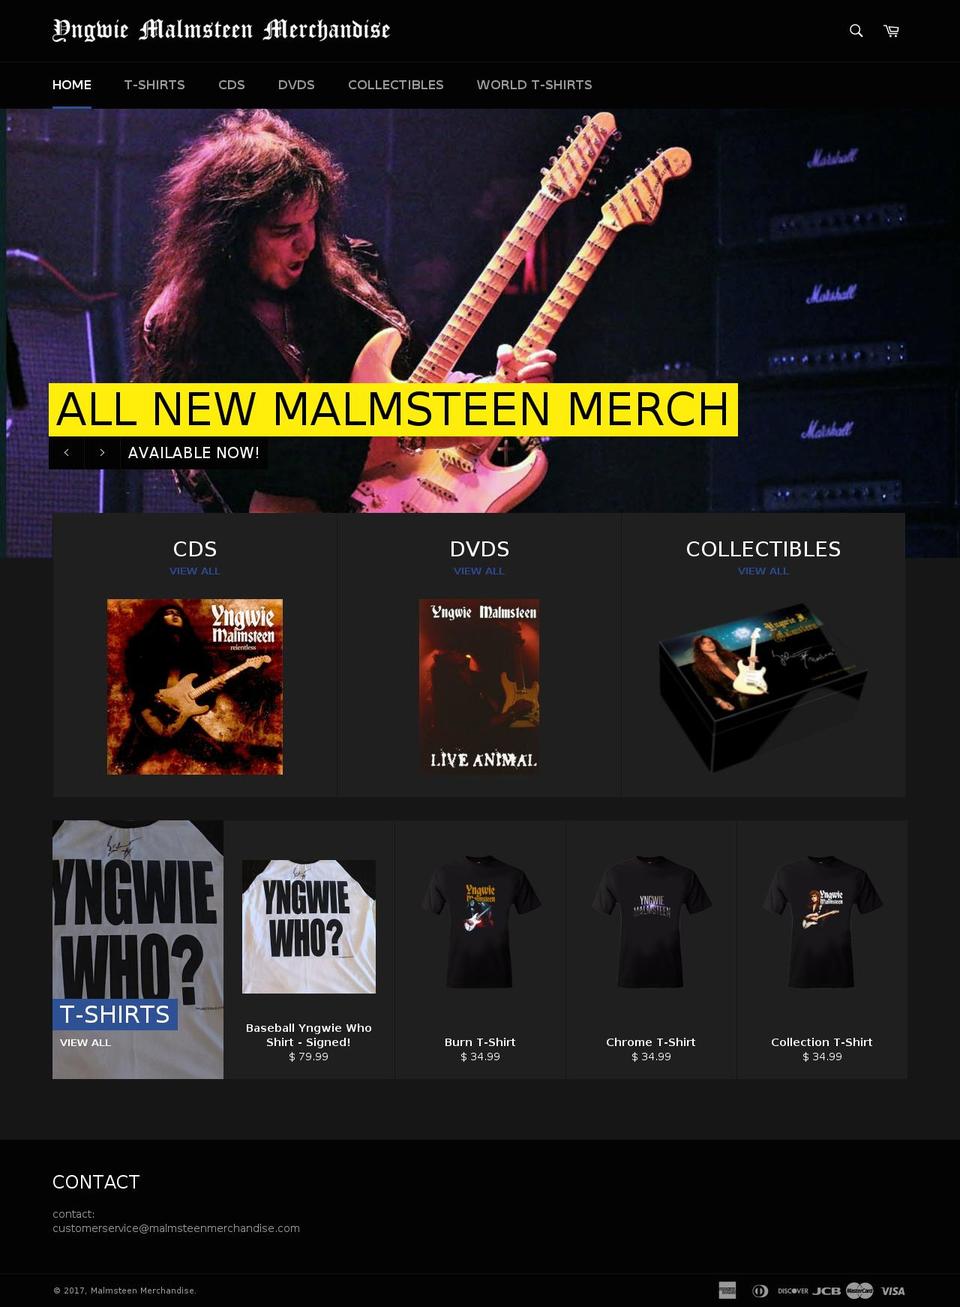 COLORBLOCK Shopify theme site example malmsteenmerchandise.com